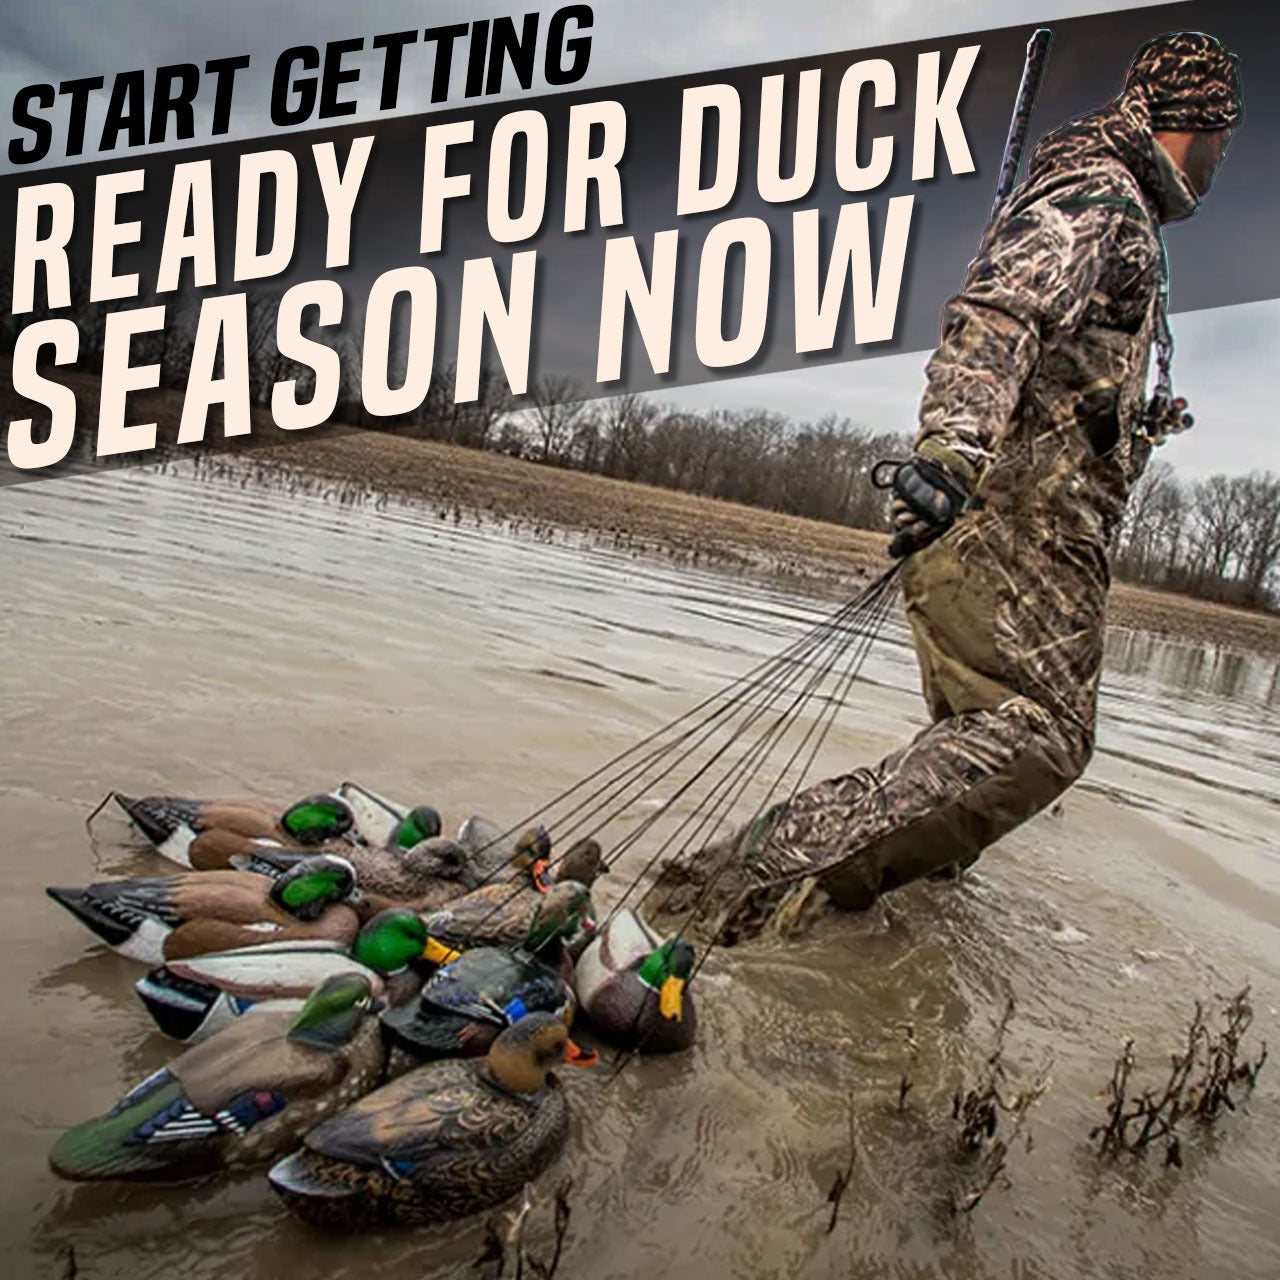 Start Getting Ready for Duck Season Now!